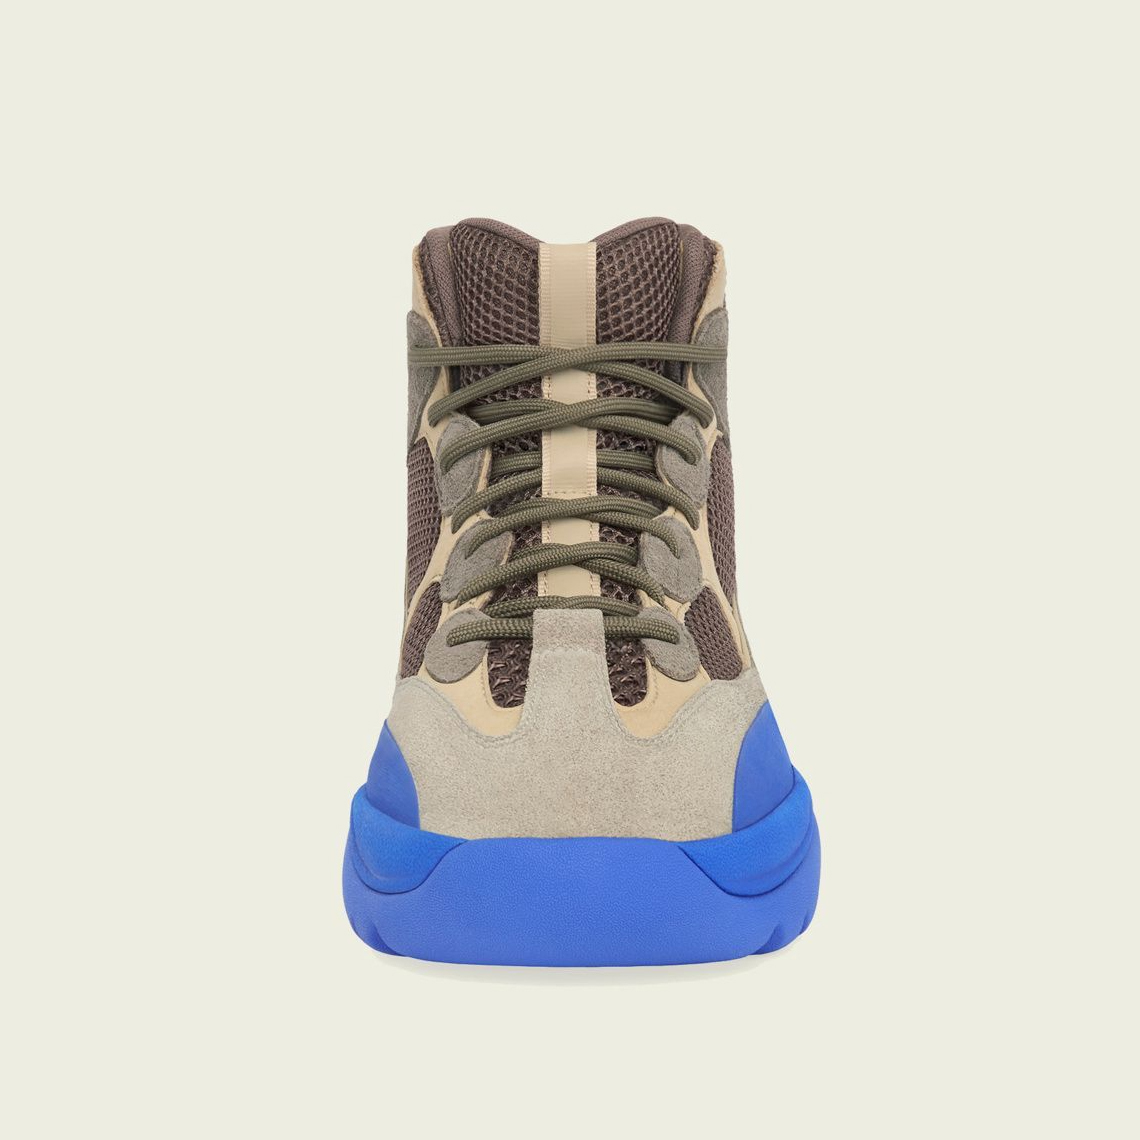 adidas-yeezy-desert-boot-taupe-blue-release-date-3